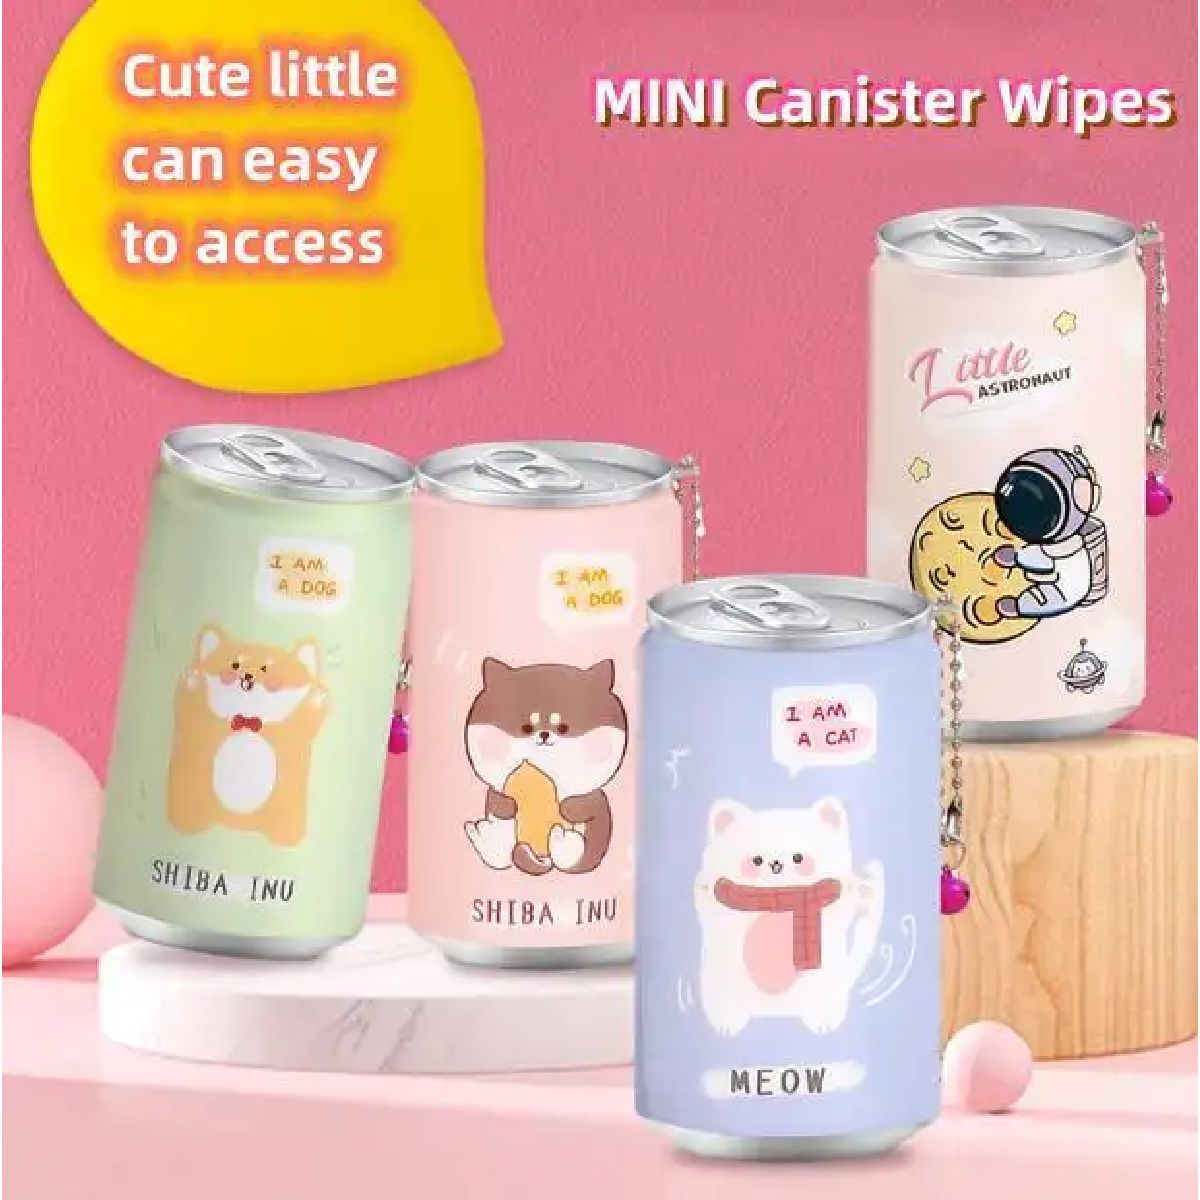 Wet Wipes In Cute Reusable Tin for Travelling Baby wipes Makeup removable Refillable-Each